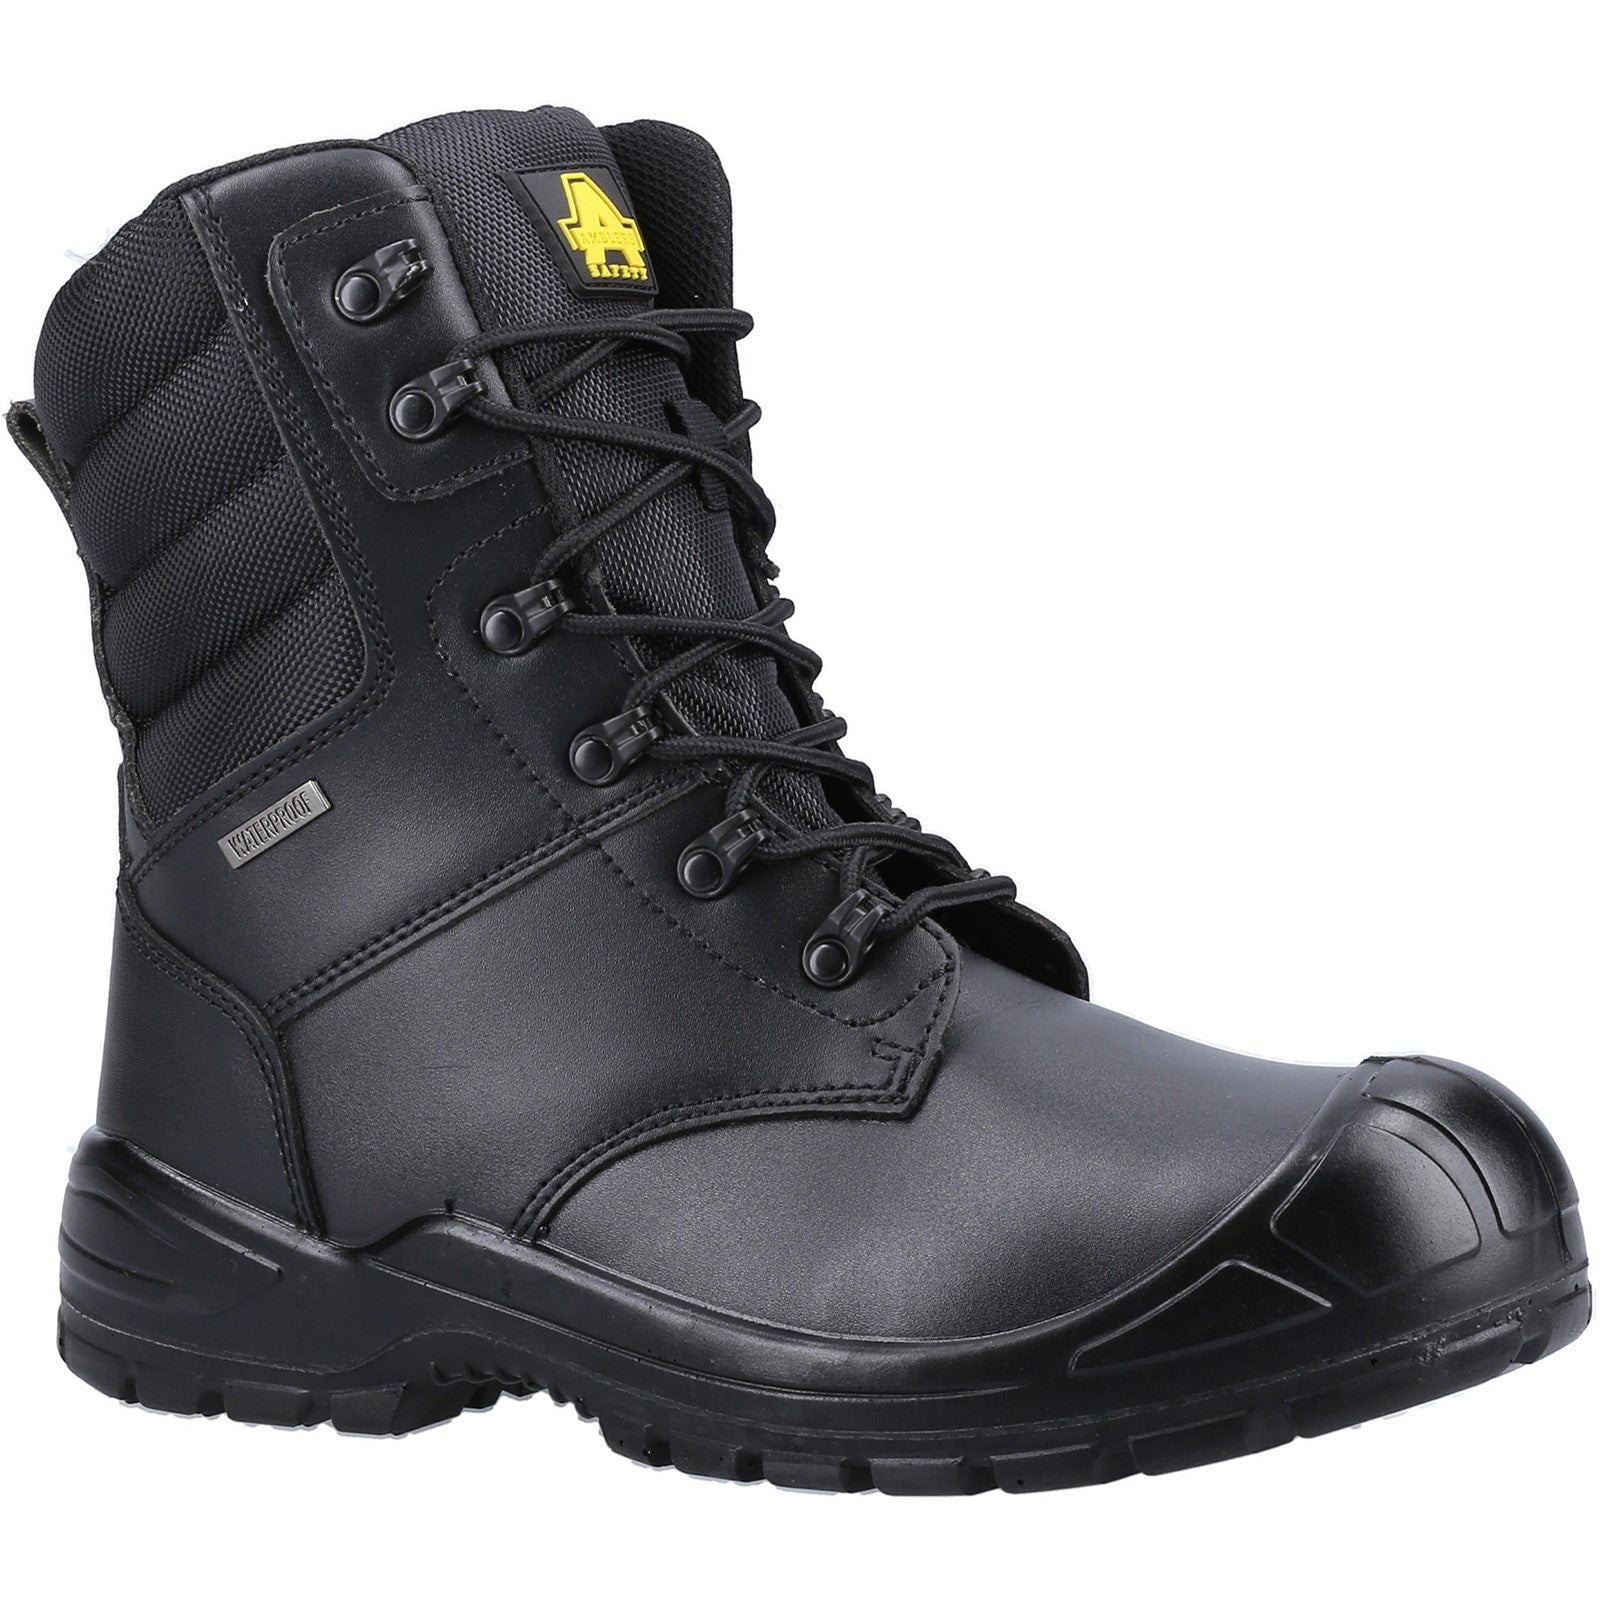 Amblers 240 Safety Boot - Black